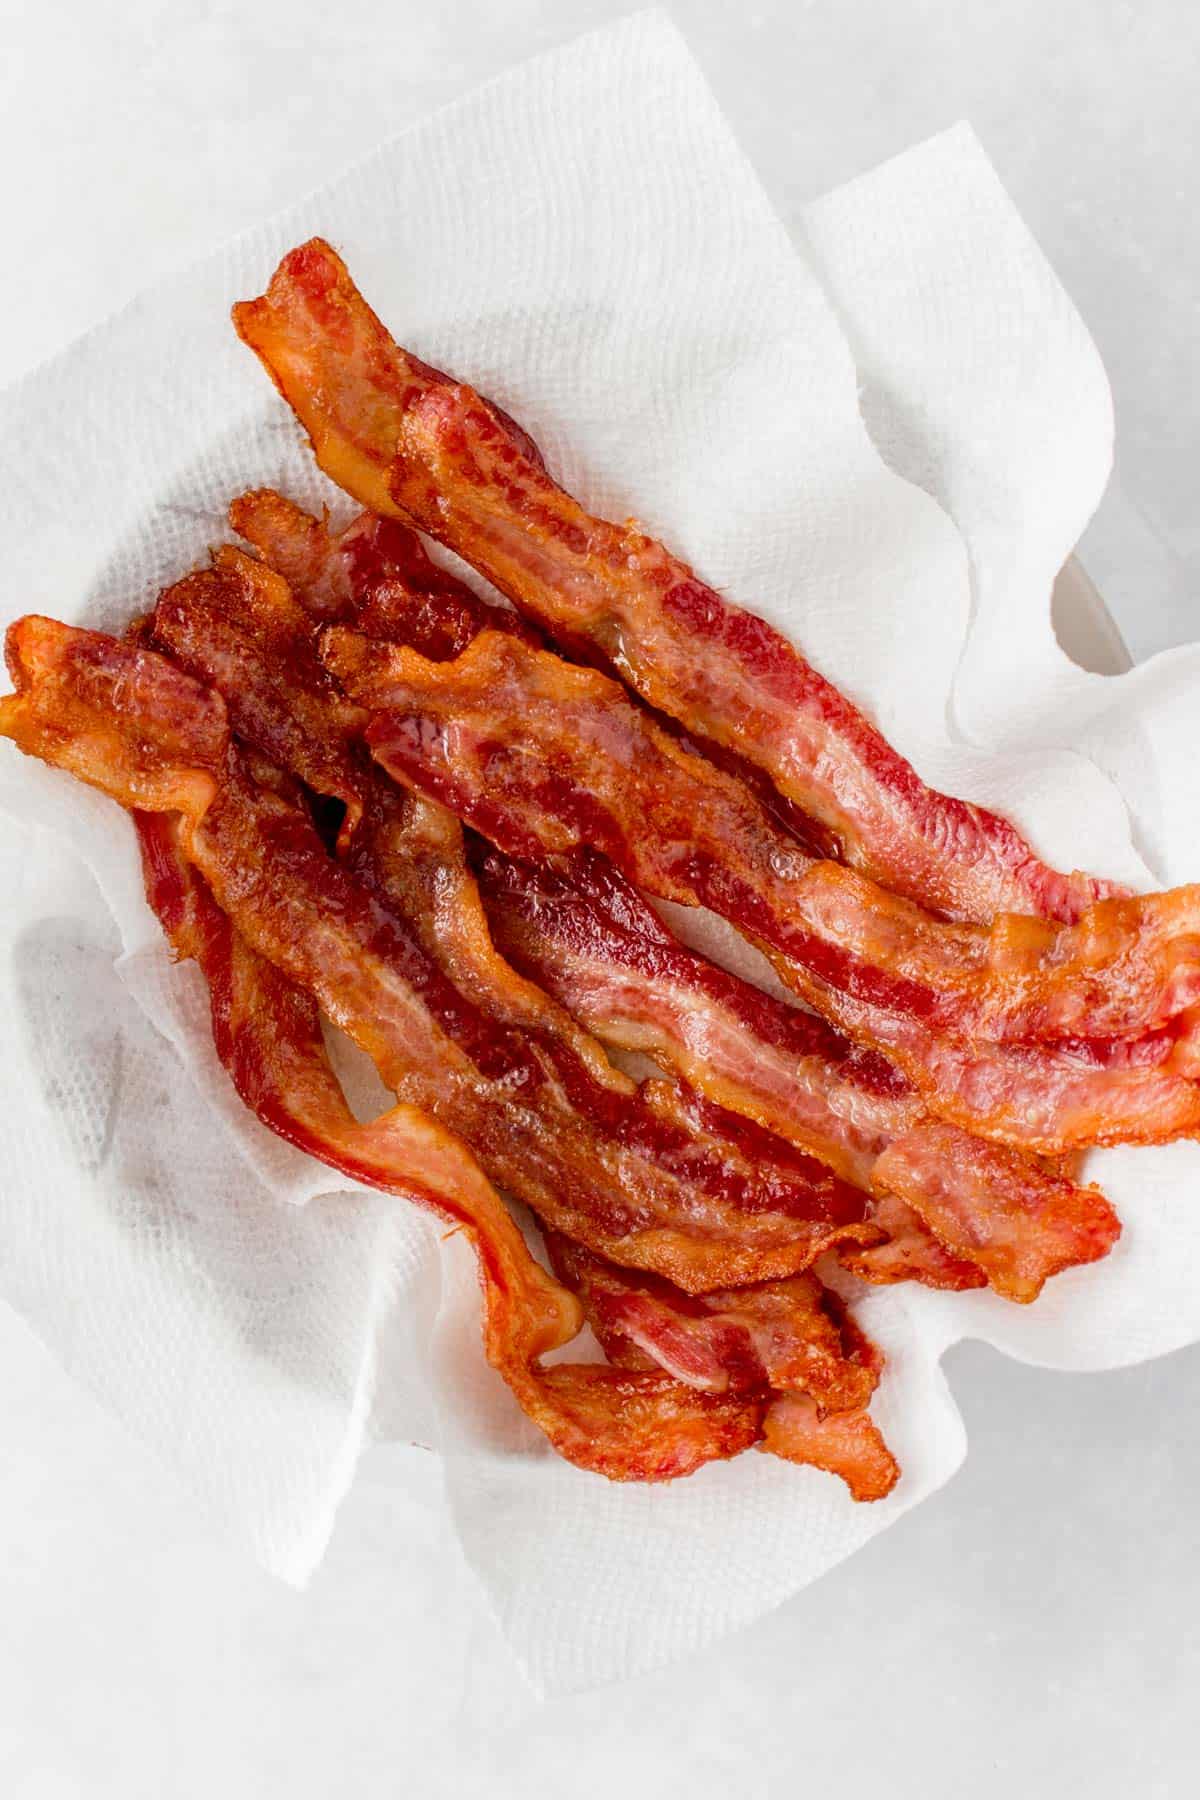 Bacon on paper towels.